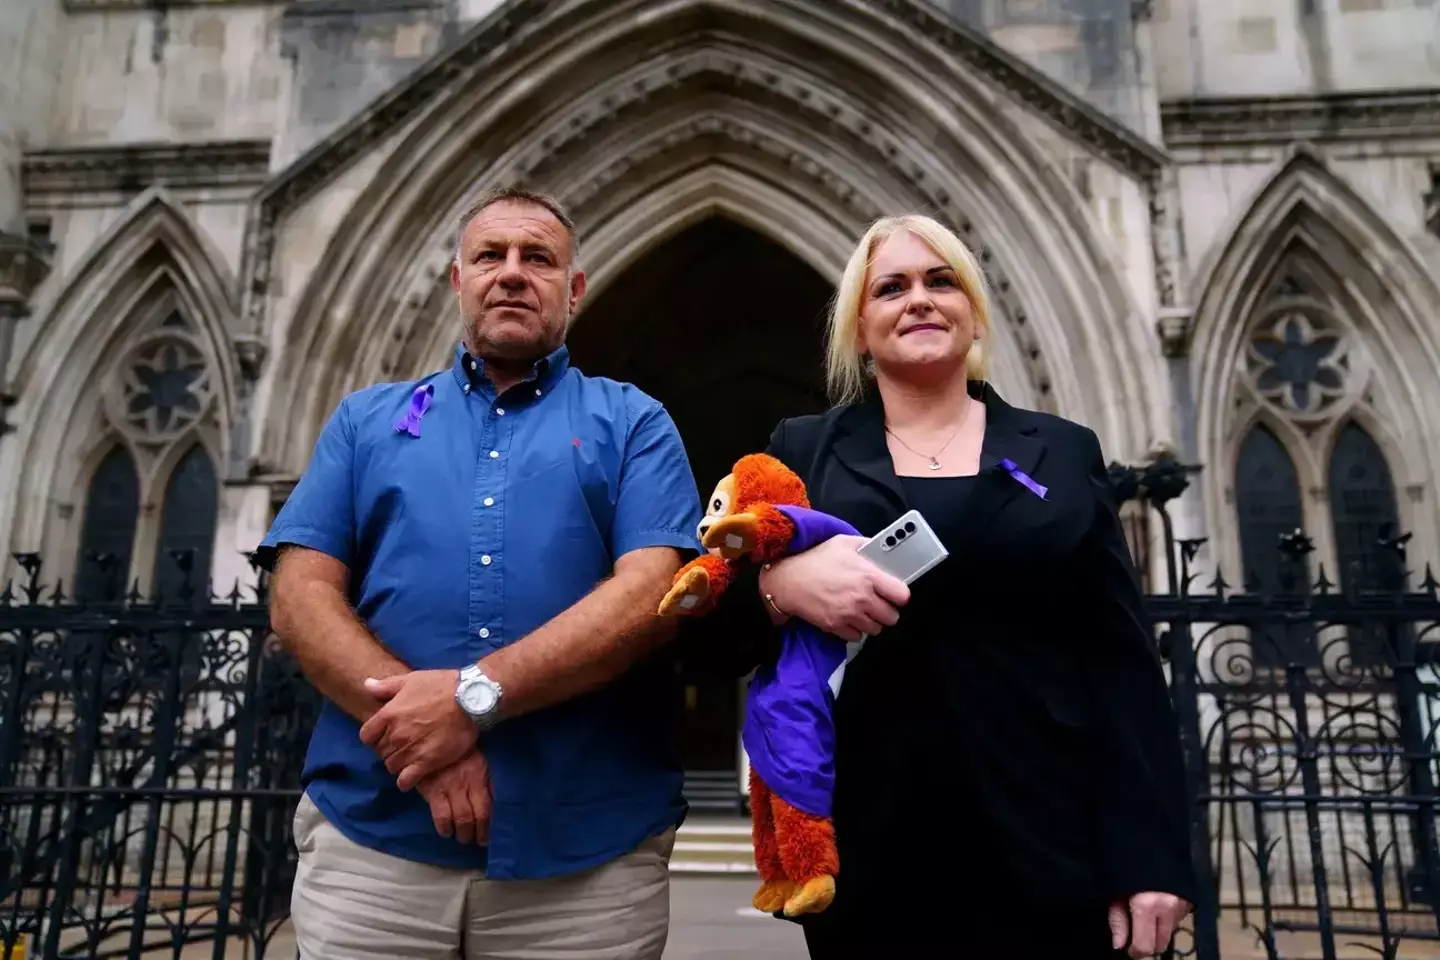 Archie's parents Paul and Hollie have continued to fight the ruling.